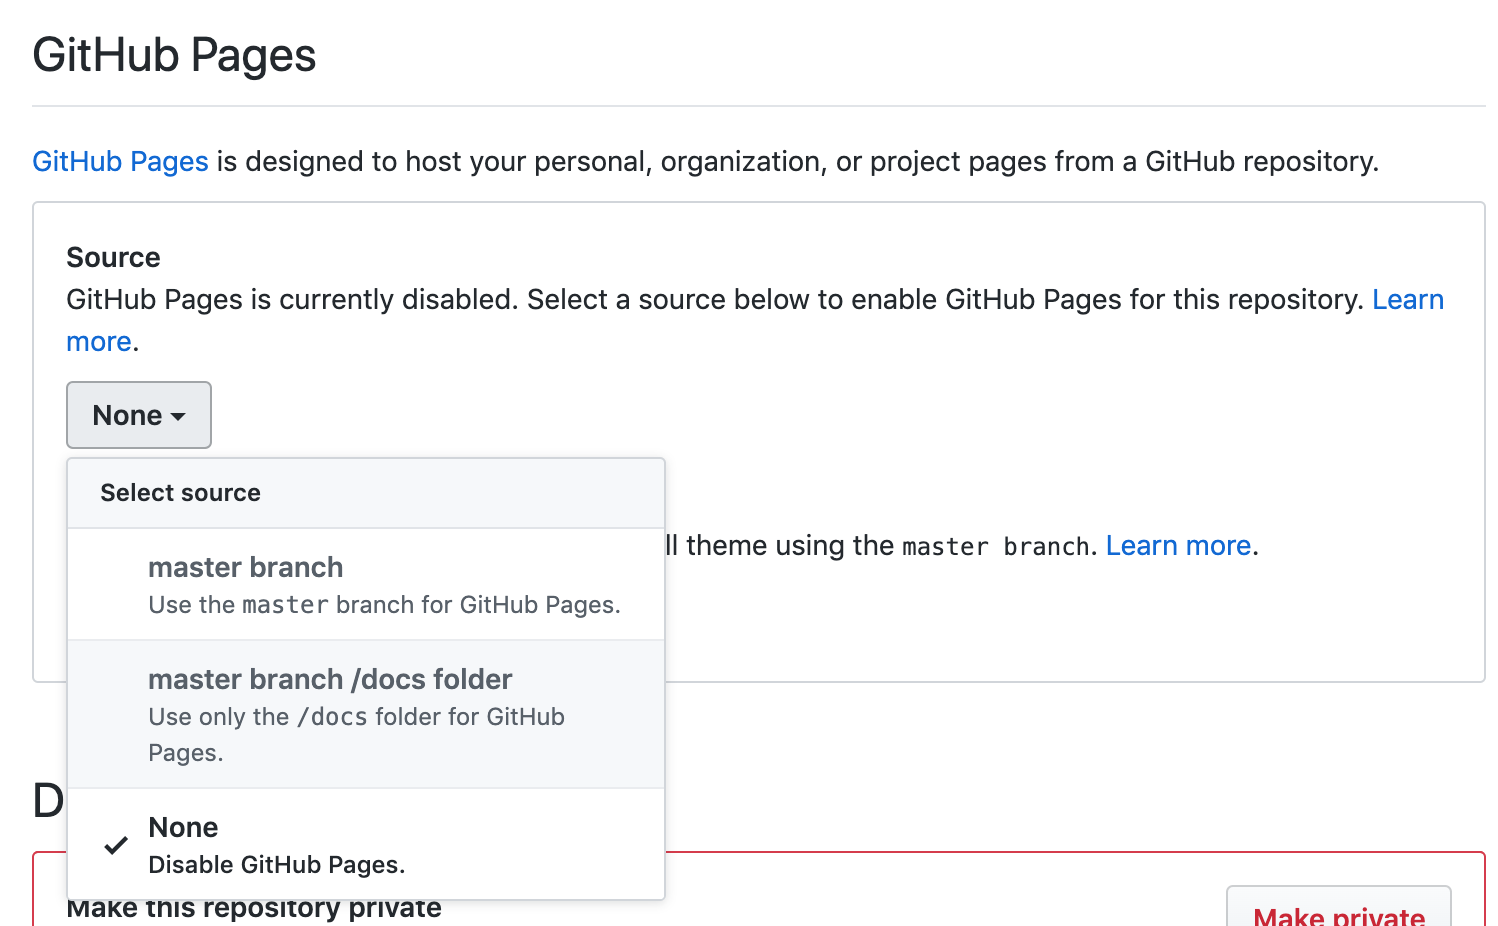 GitHub Pagesの設定